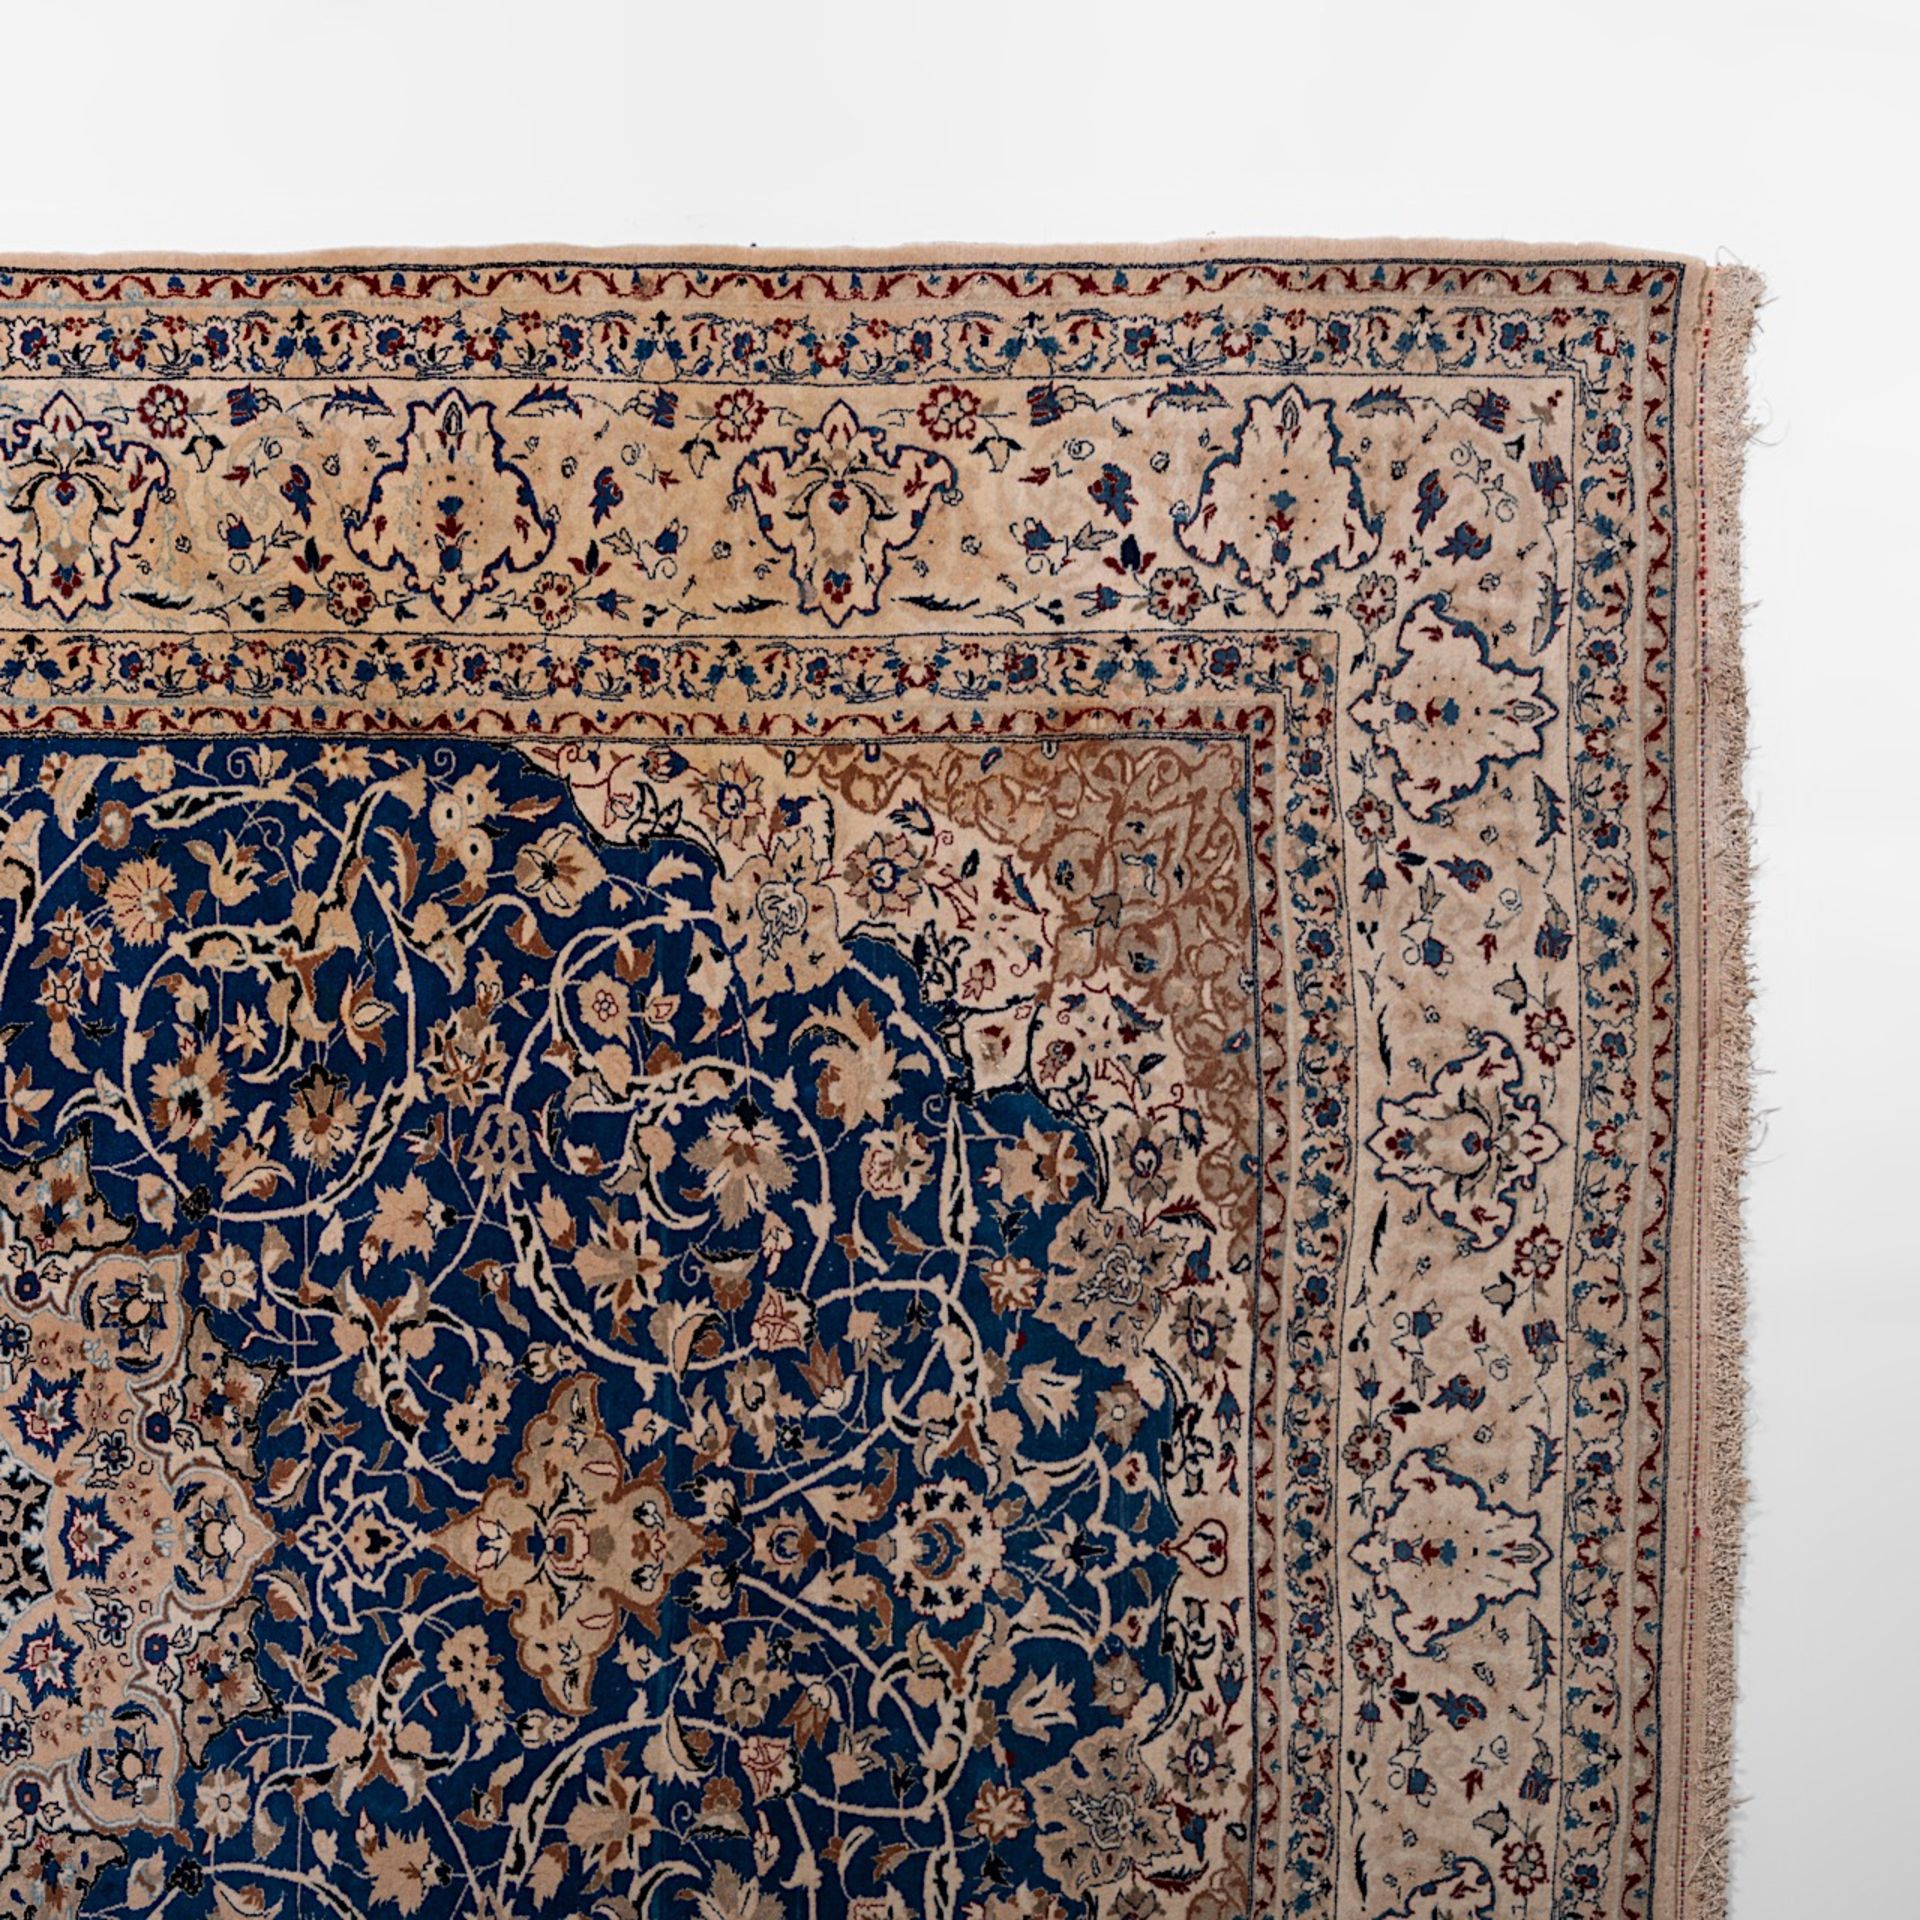 A Persian Nain woollen rug with a central medallion, 229 x 169 cm - Image 6 of 8